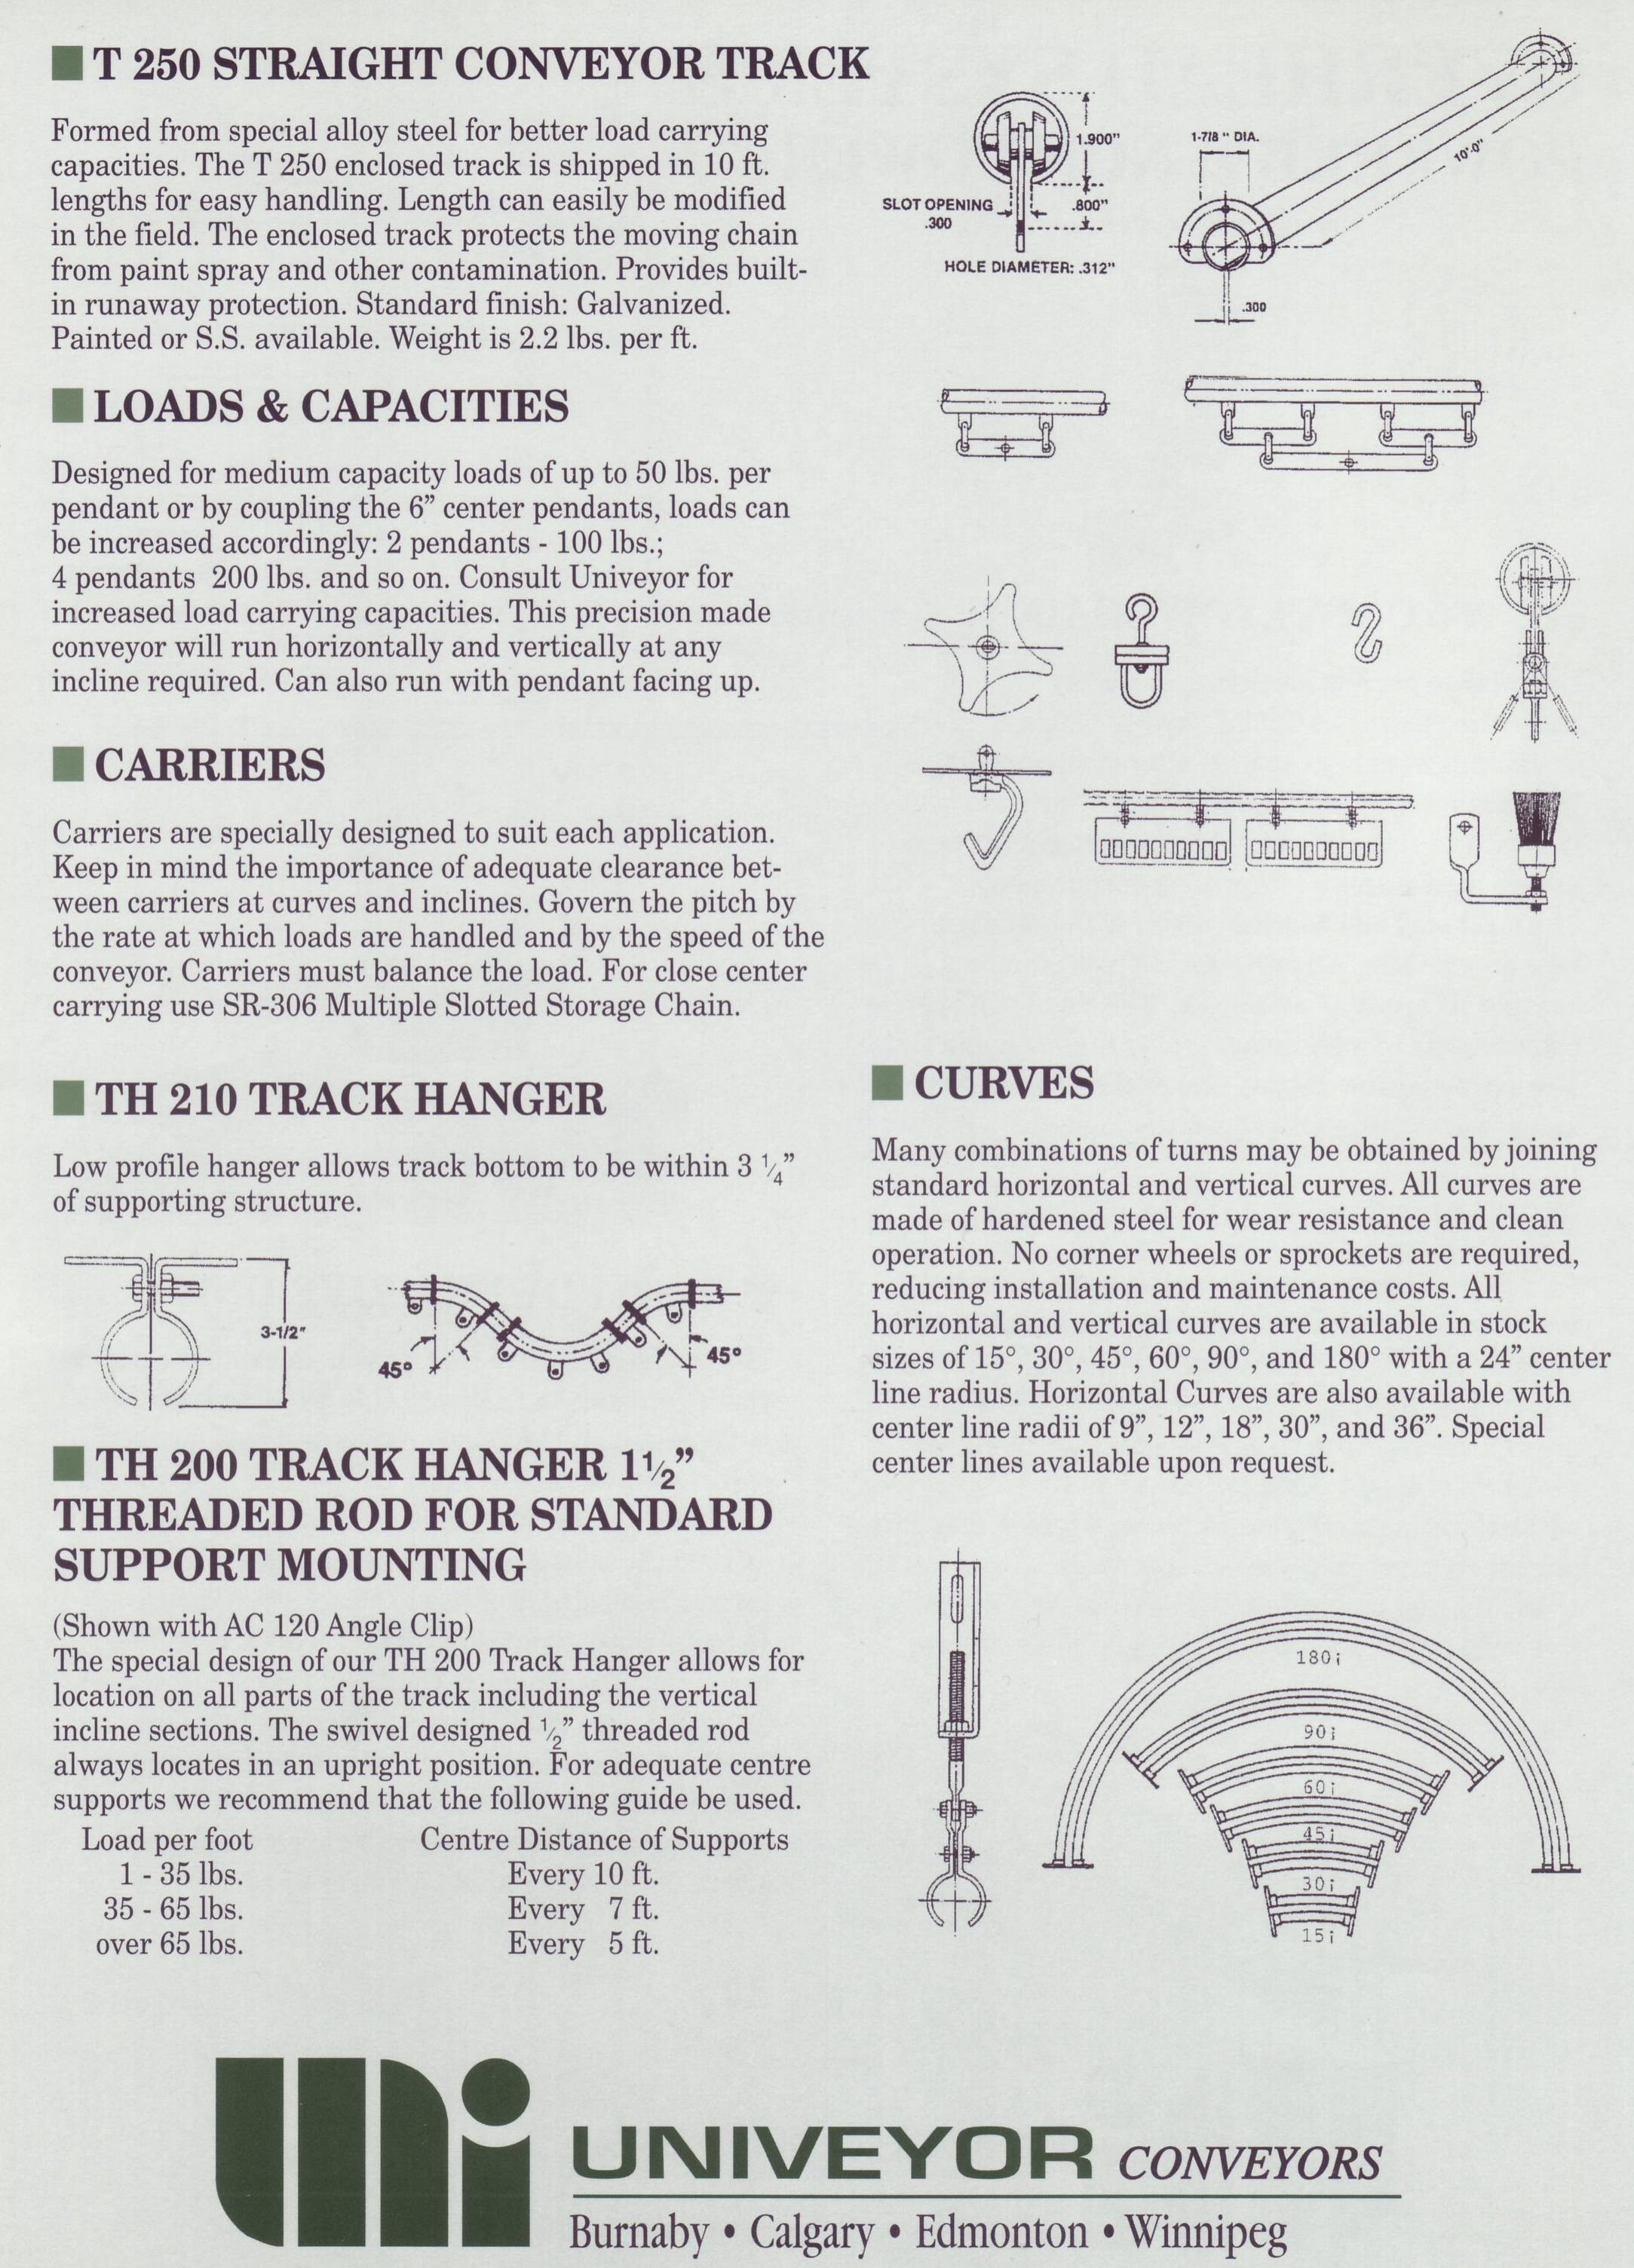 Overhead Specifications